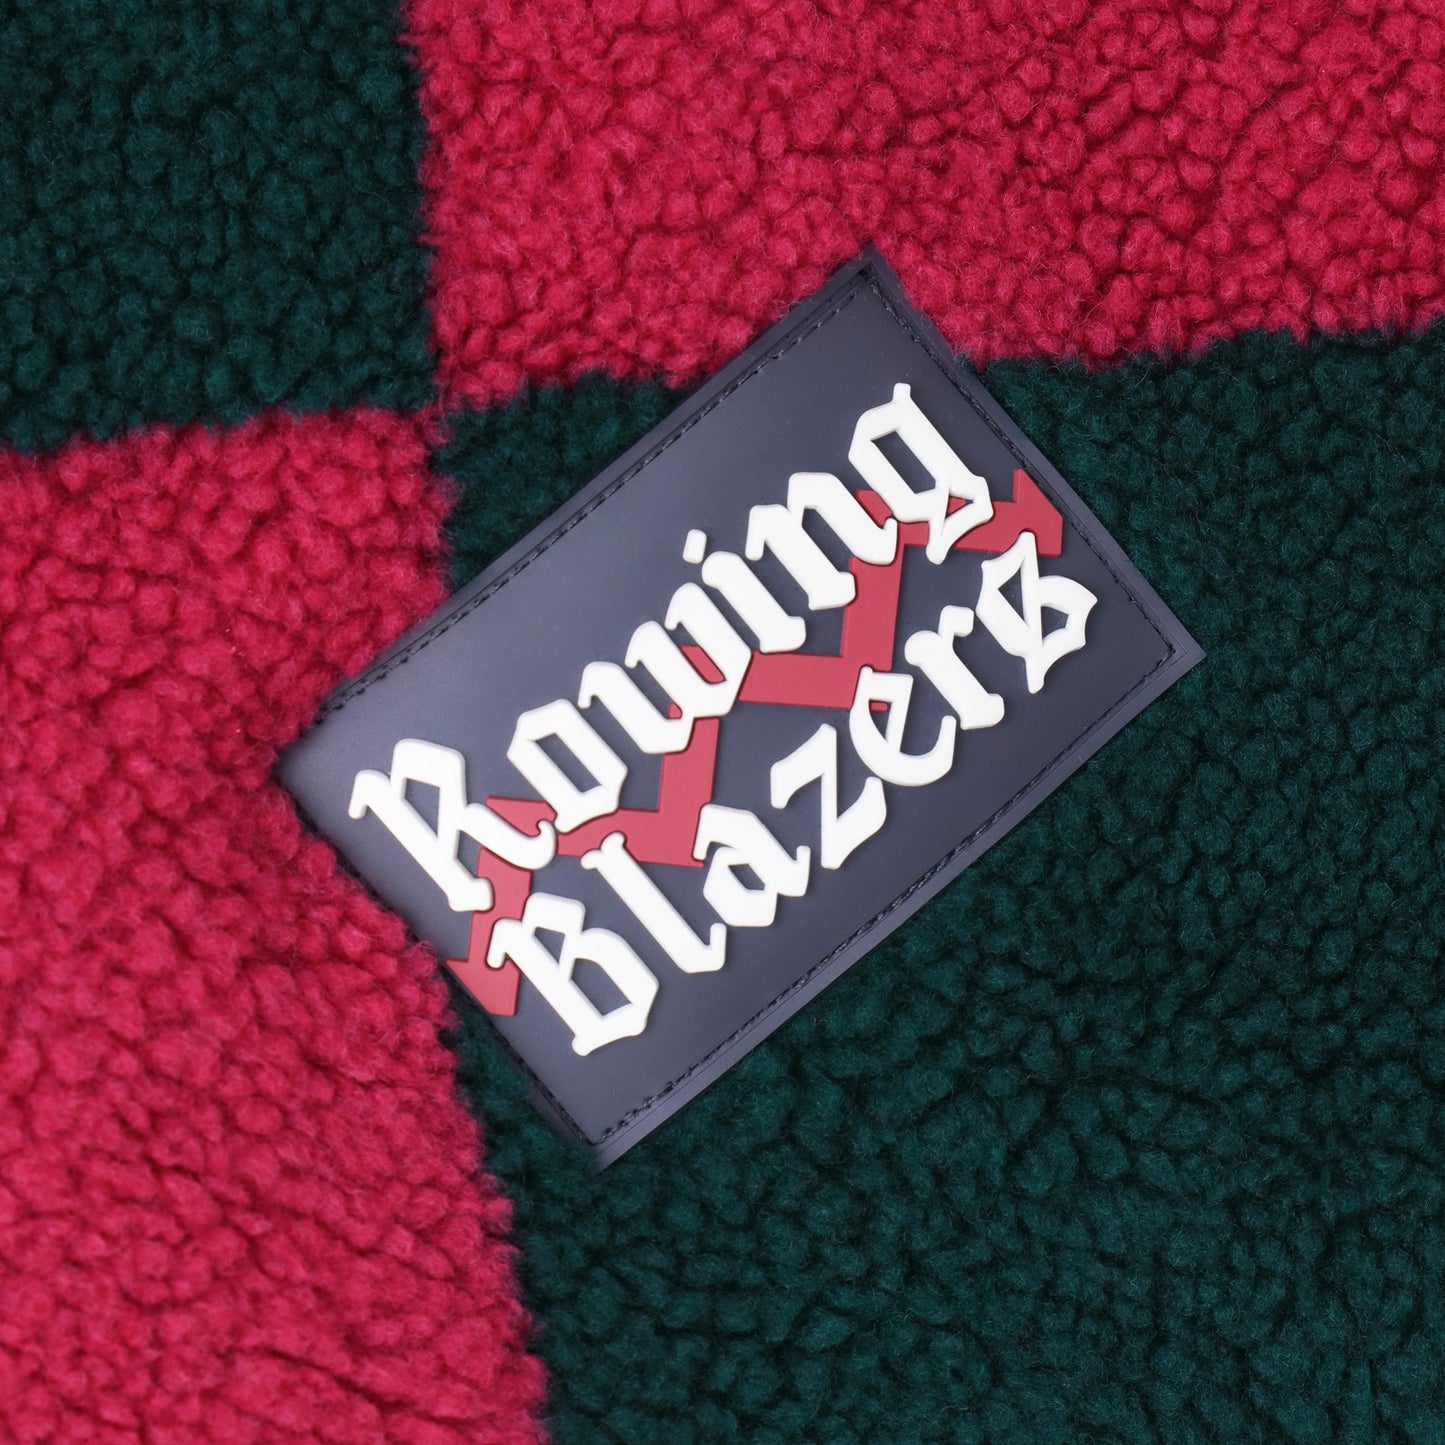 Rowing Blazers rubber patch.